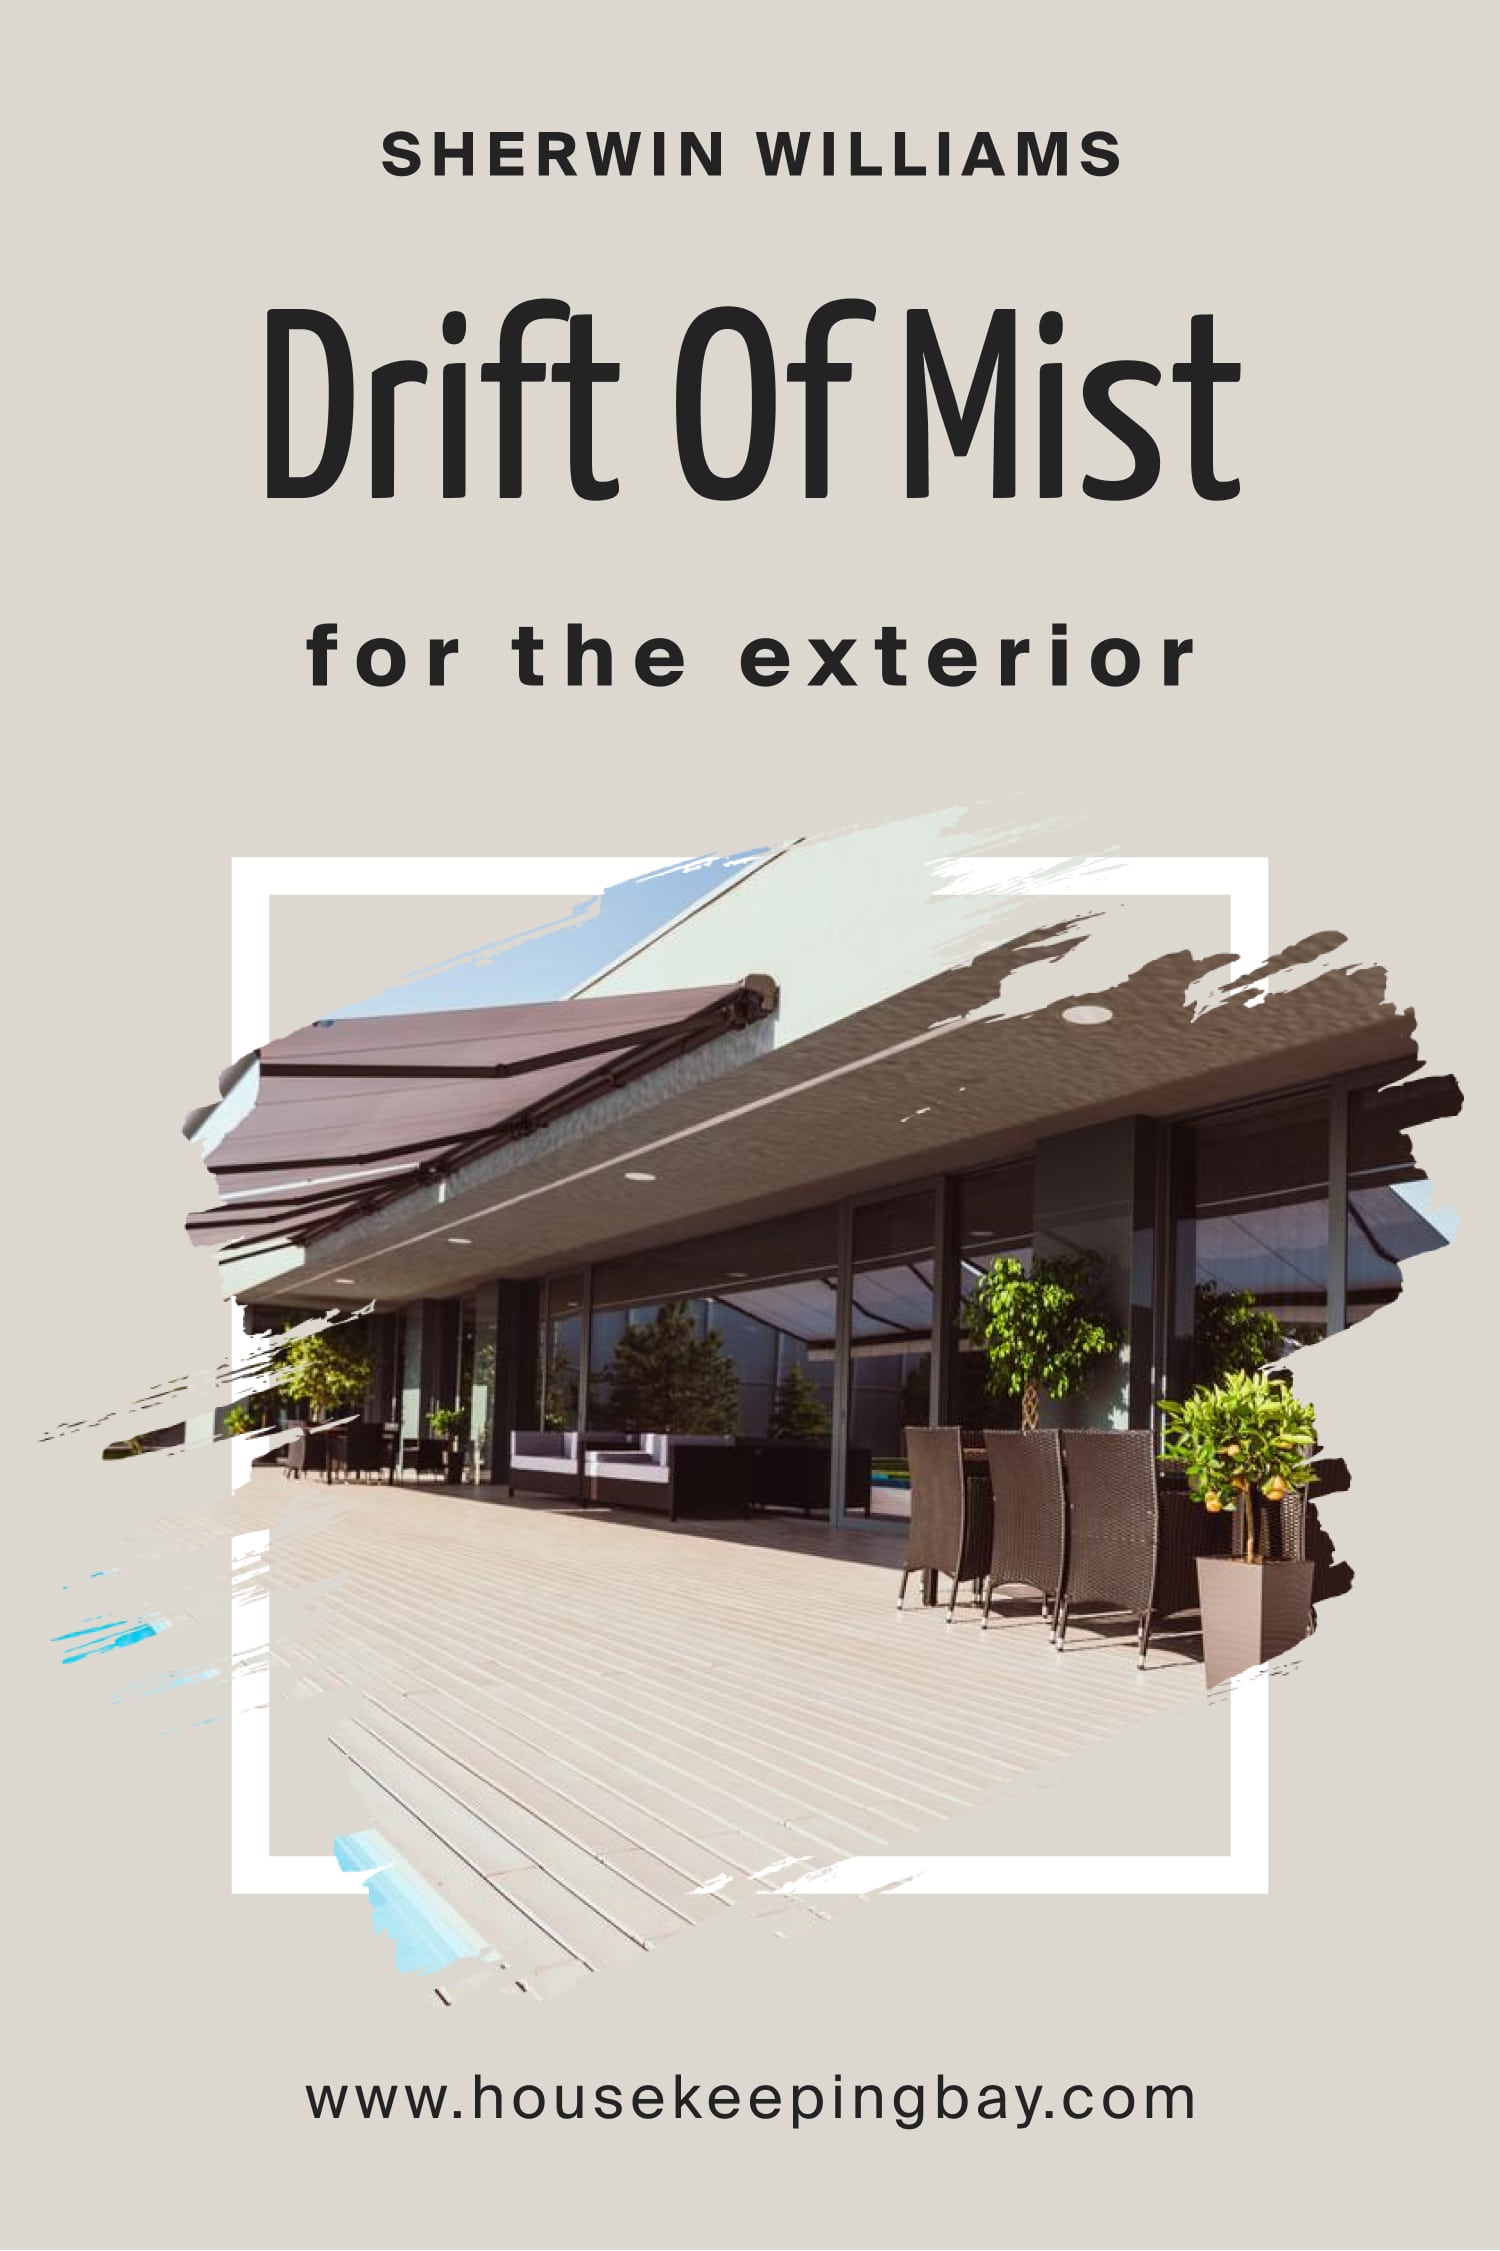 Sherwin Williams.Drift Of Mist For the exterior walls